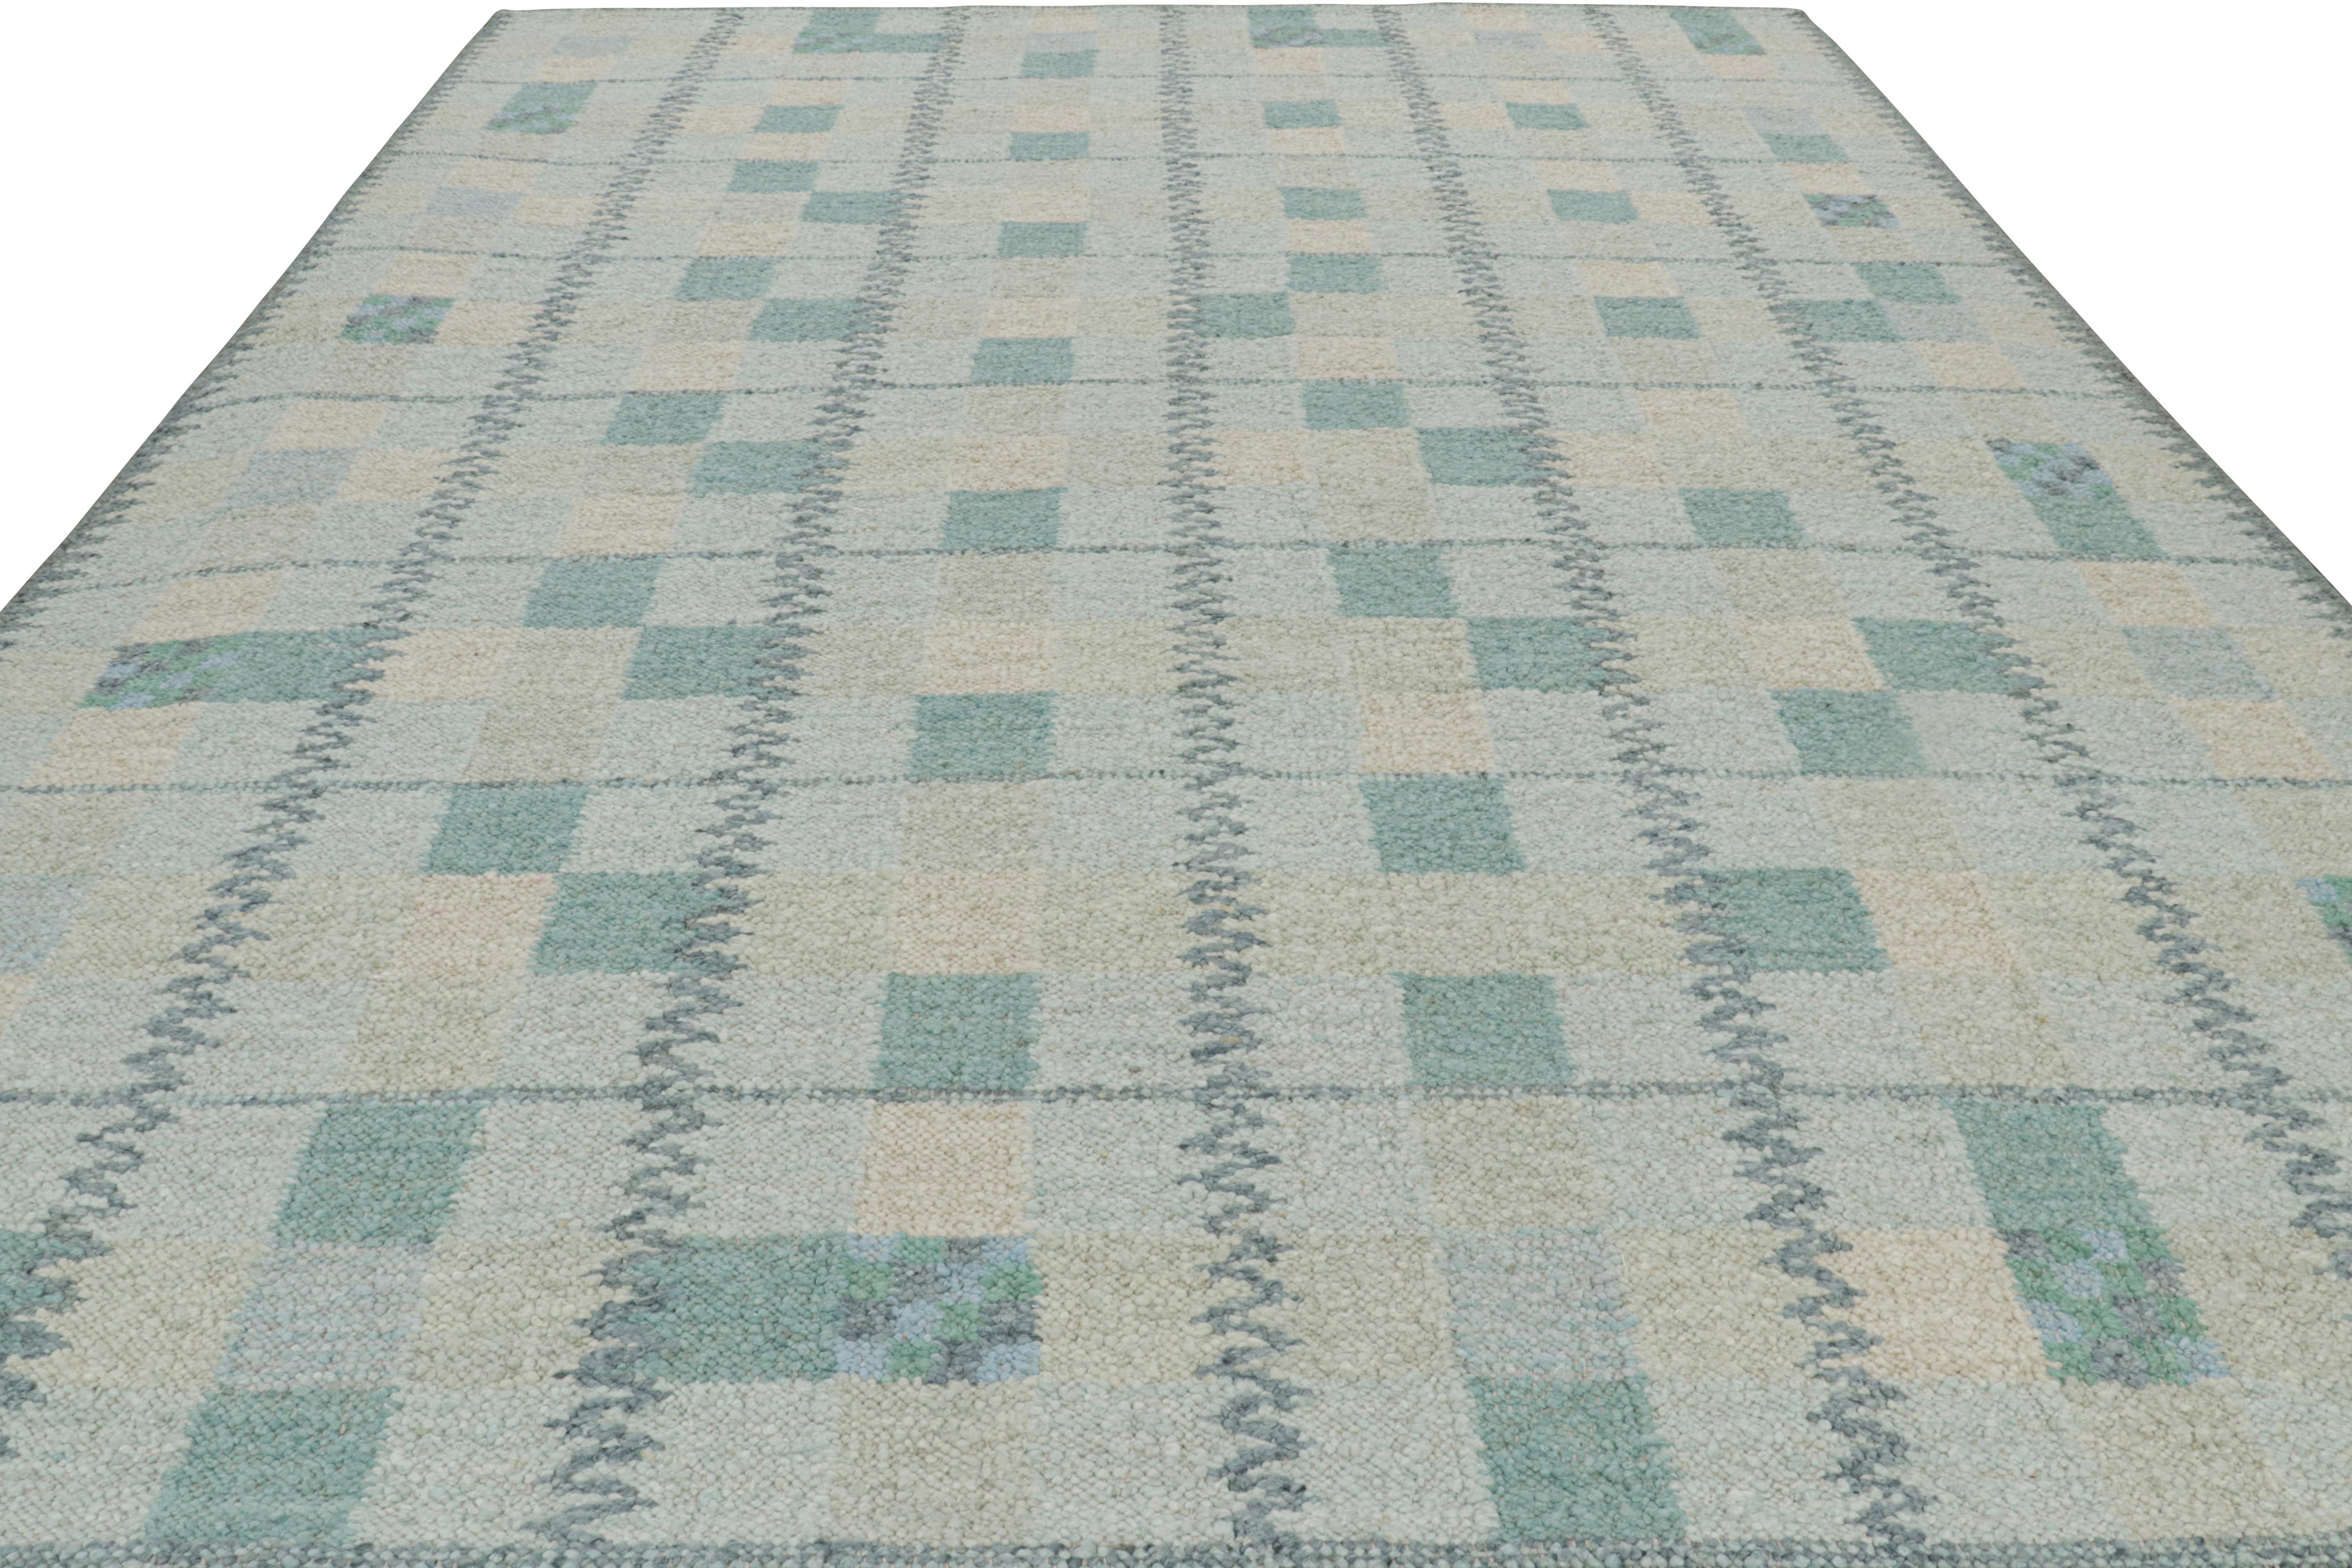 Hand-Woven Rug & Kilim’s Scandinavian Style Rug in Teal Blue Tones with Geometric Patterns For Sale